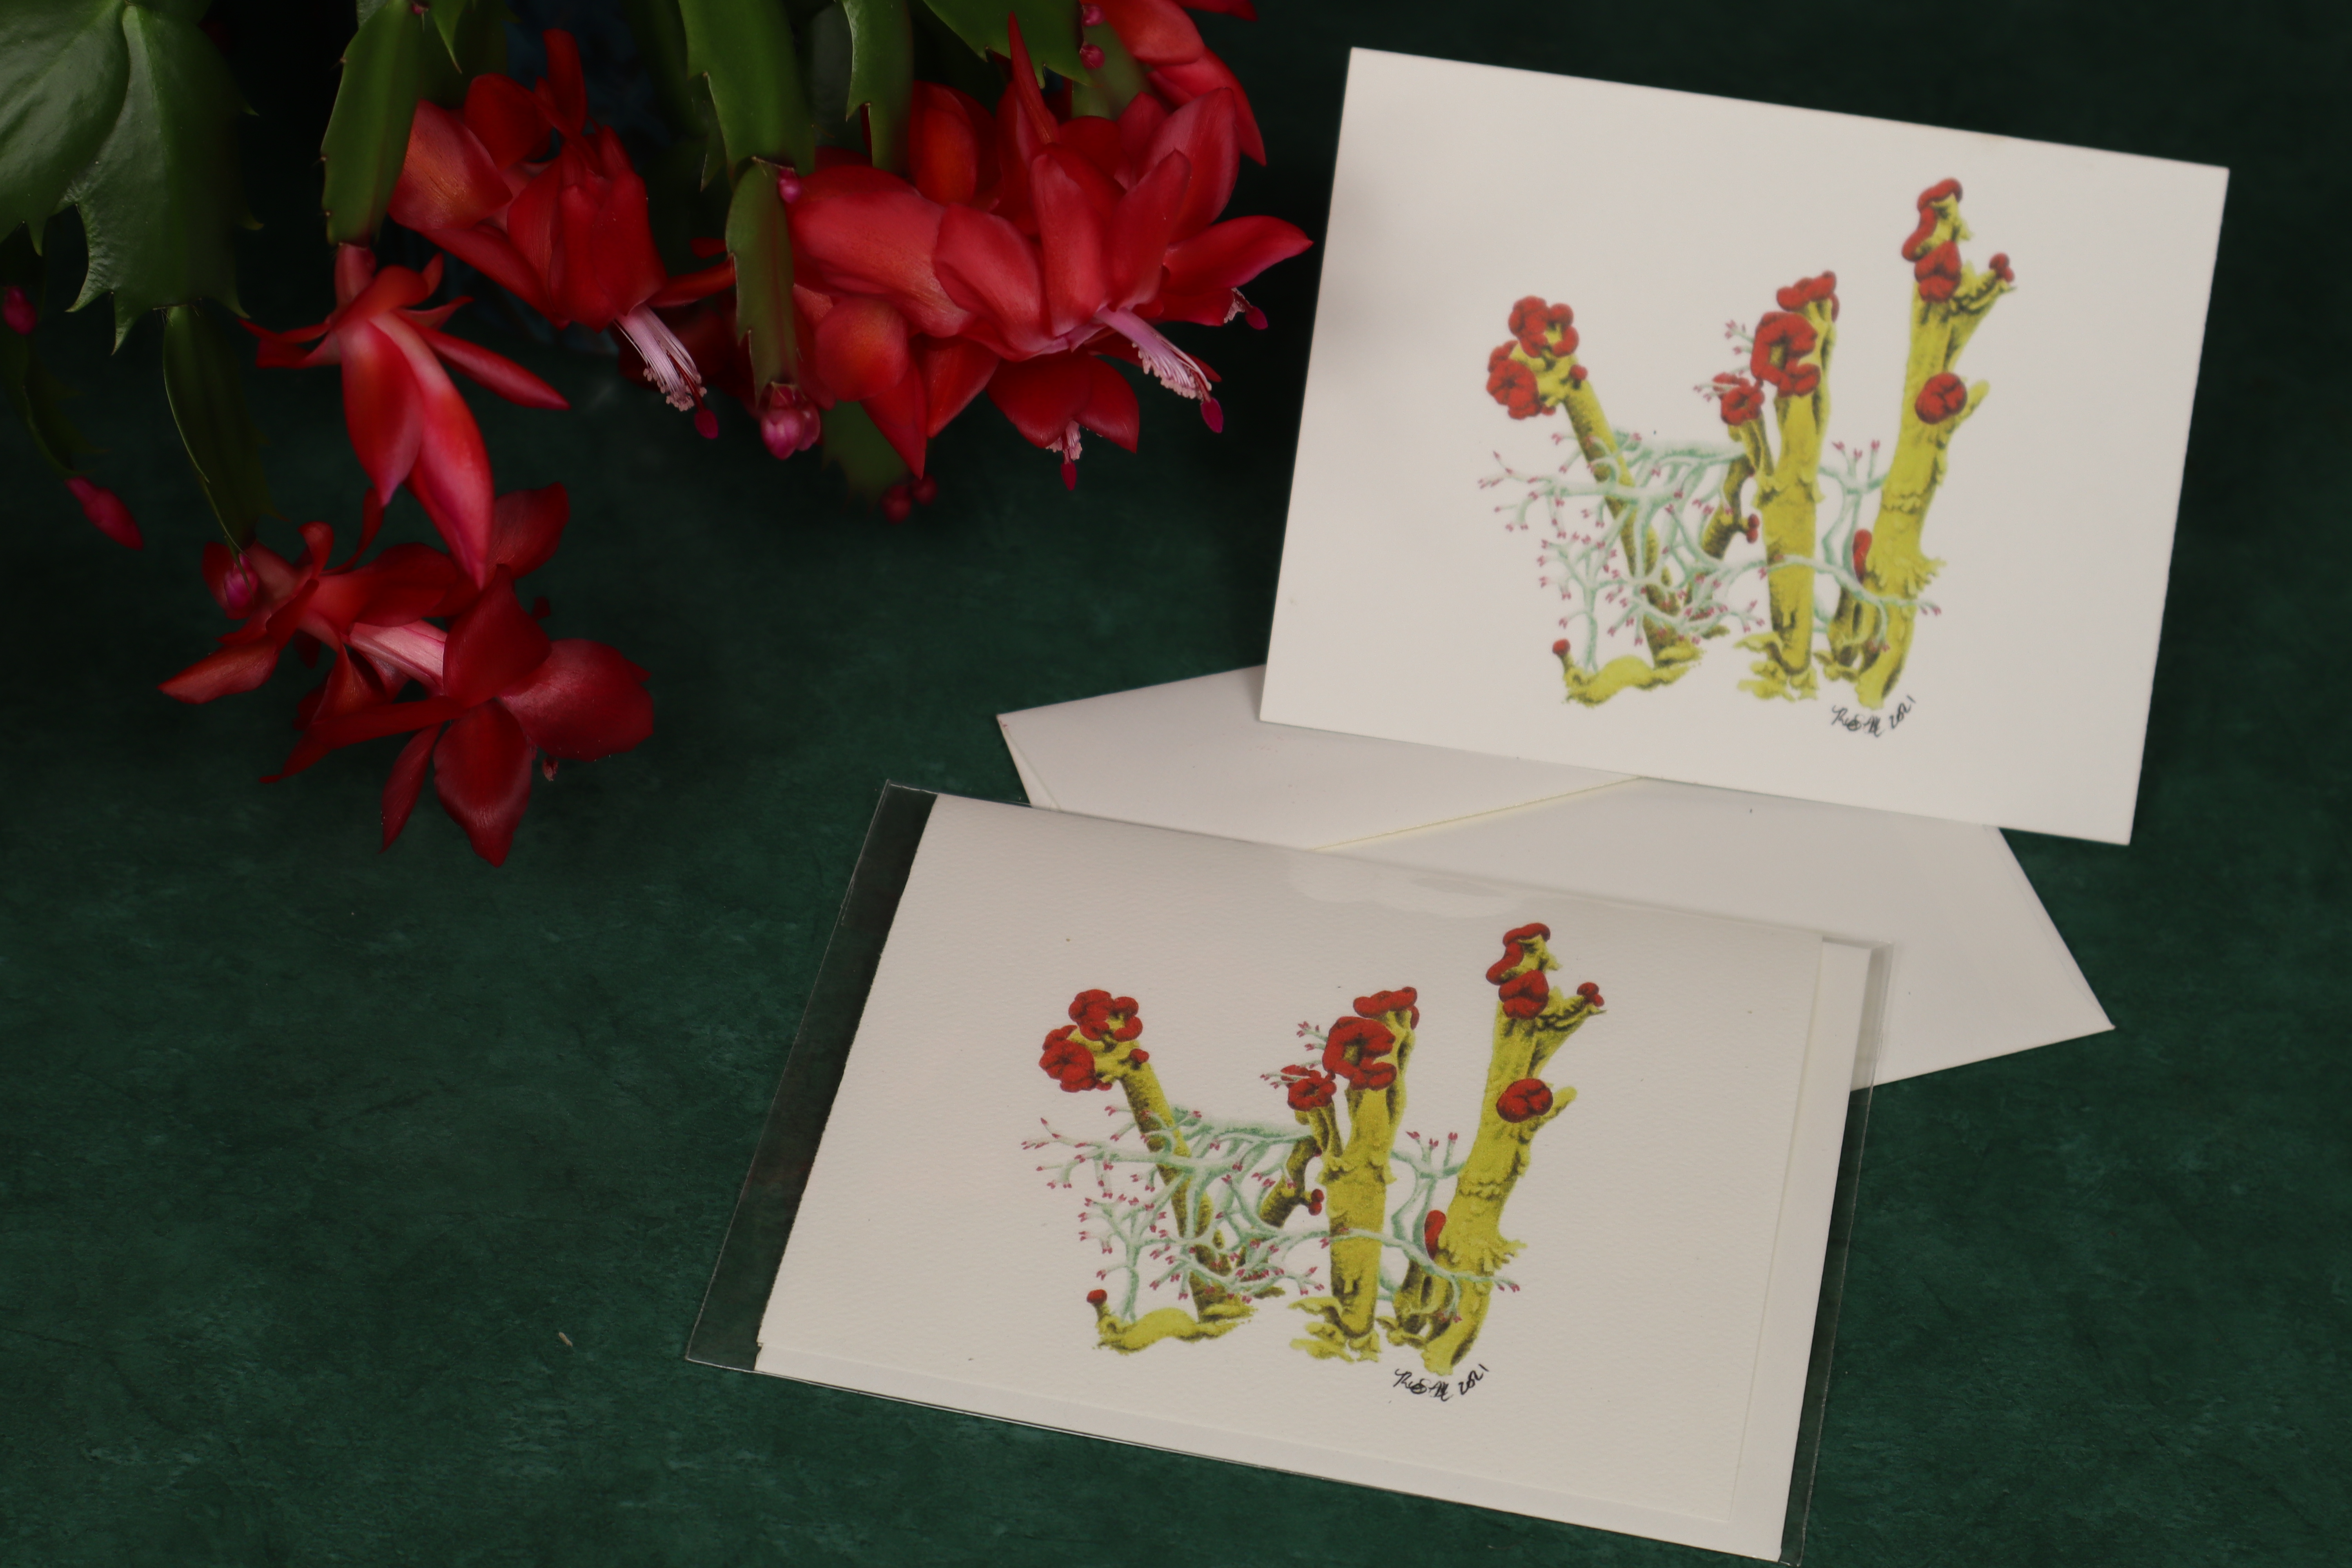 Photo of note cards with a drawing of british soldiers and reindeer lichens in red and green. A red flowering Christmas cactus can be seen in the left upper corner.